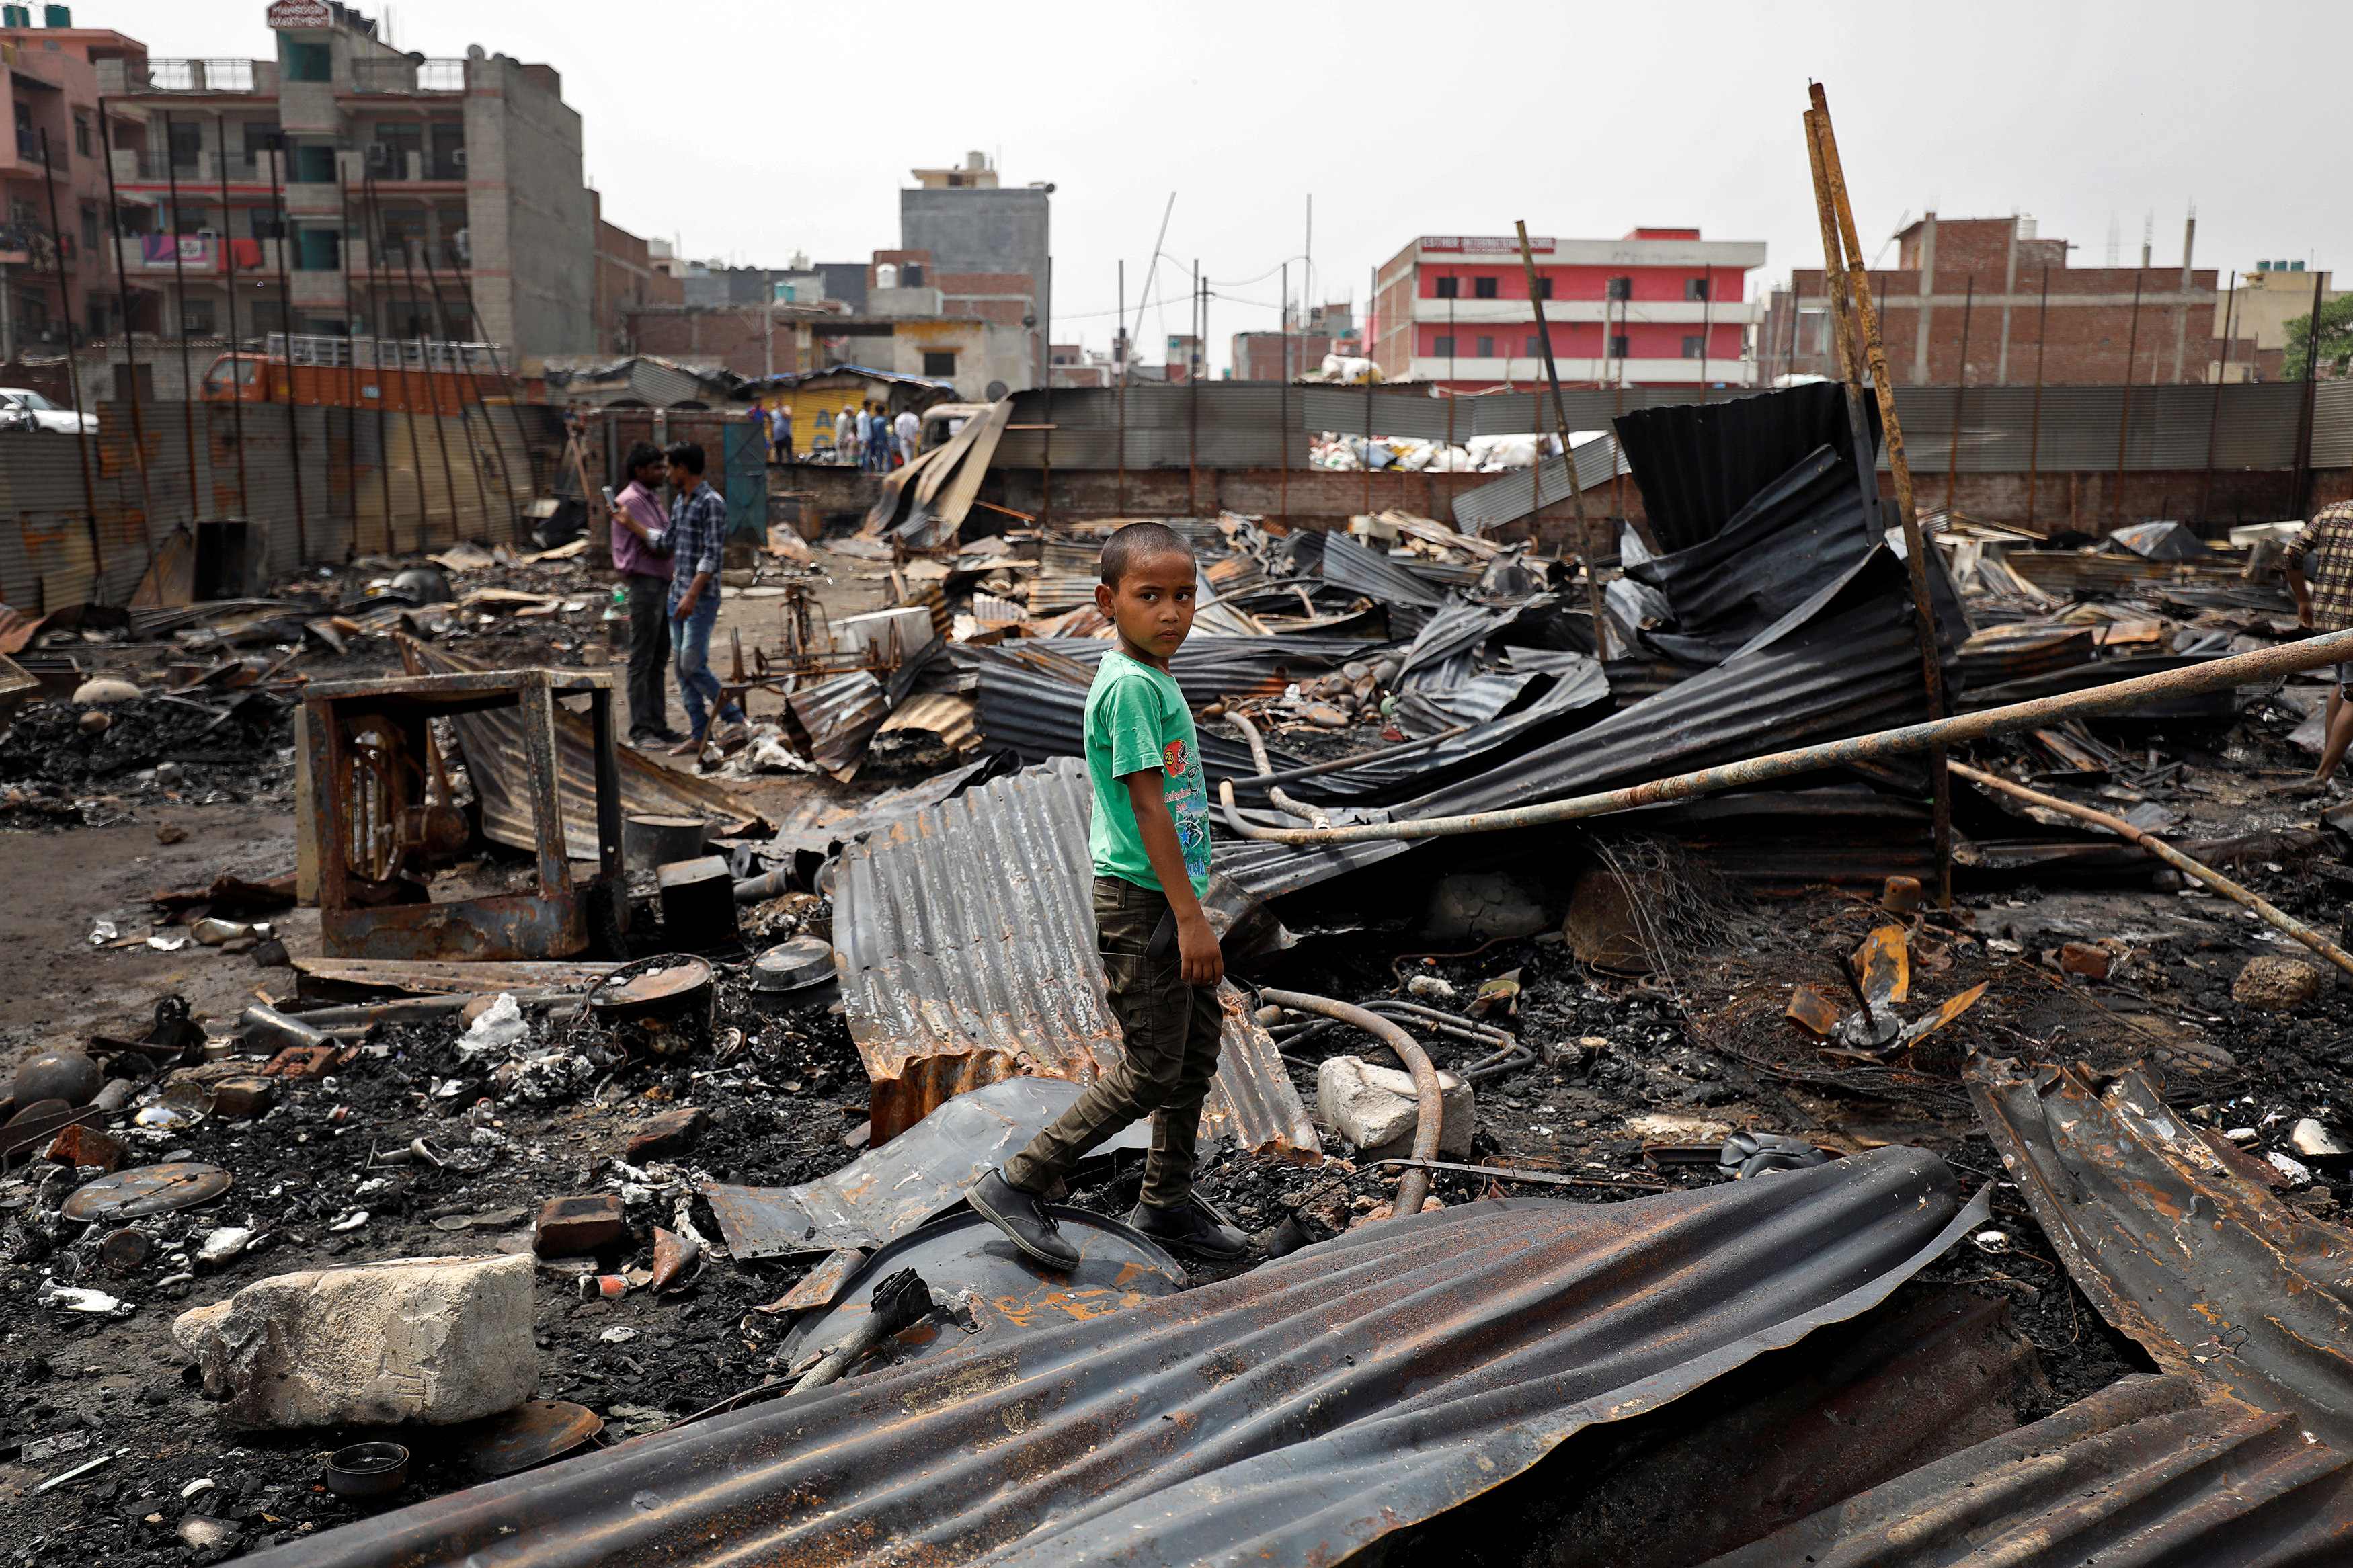 A boy from Rohingya community walks on the debris after a fire broke out in the camp in New Delhi